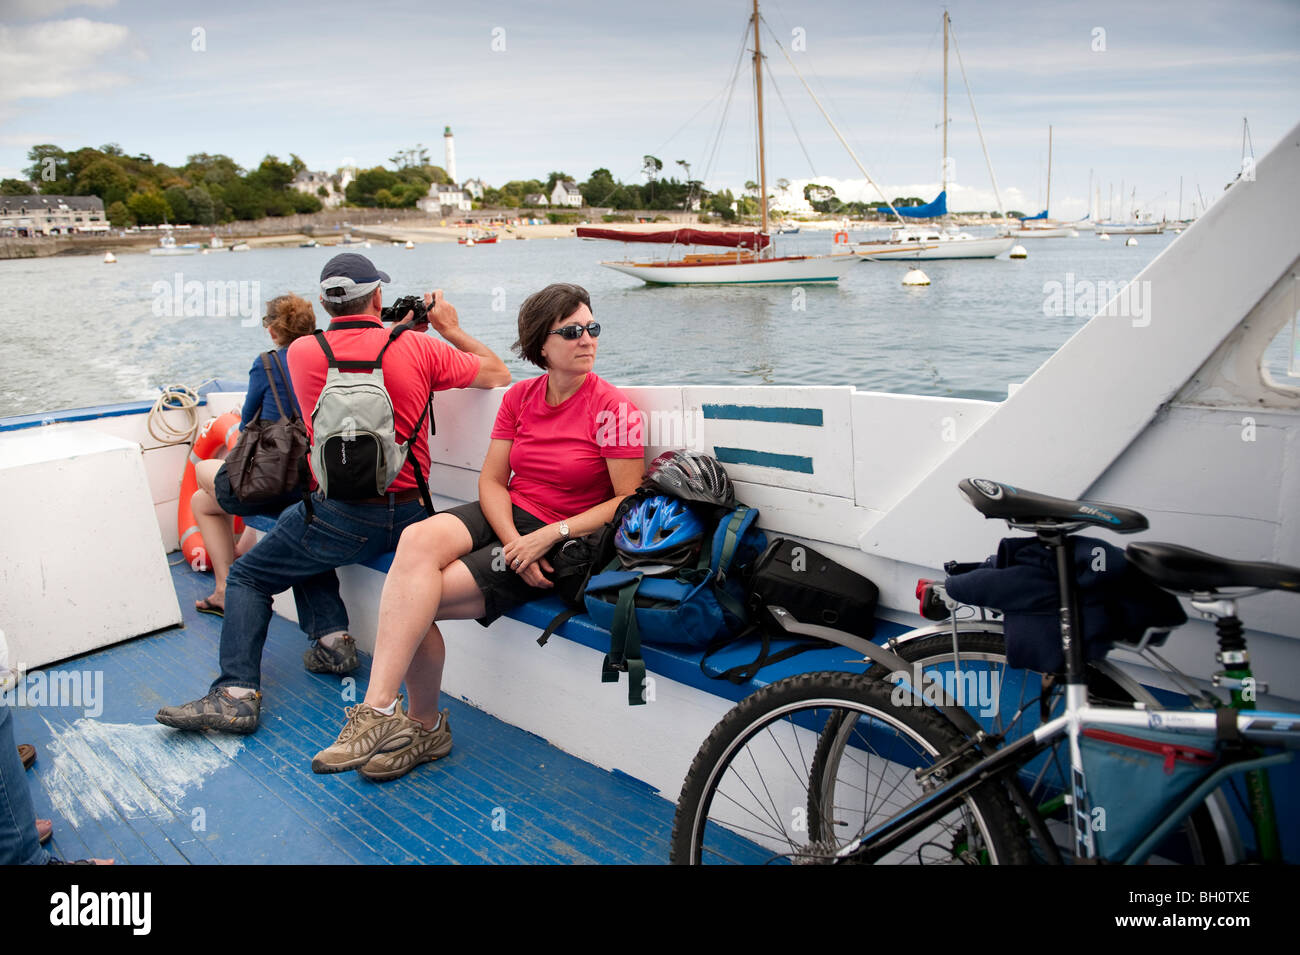 Foot passengers take the small foot ferry across the River Odet between Benodet and Sainte Marine in Brittany, France Stock Photo